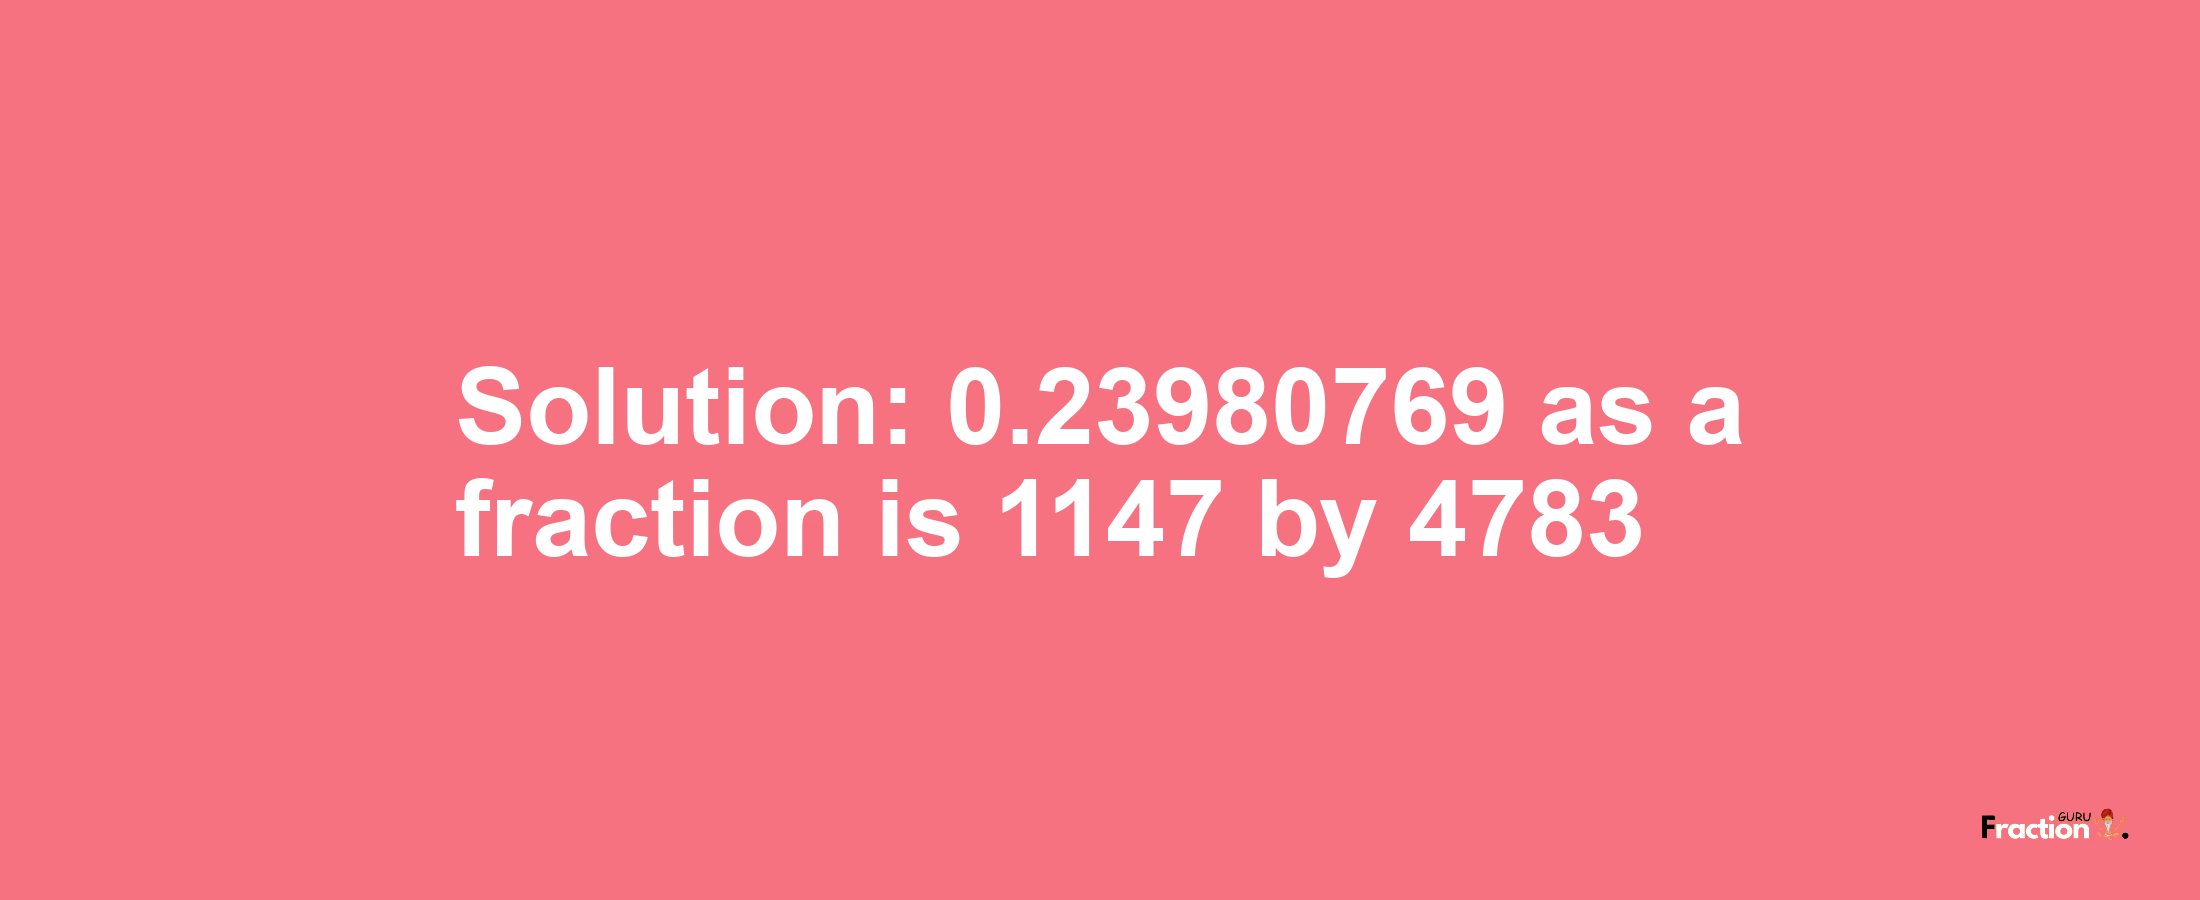 Solution:0.23980769 as a fraction is 1147/4783